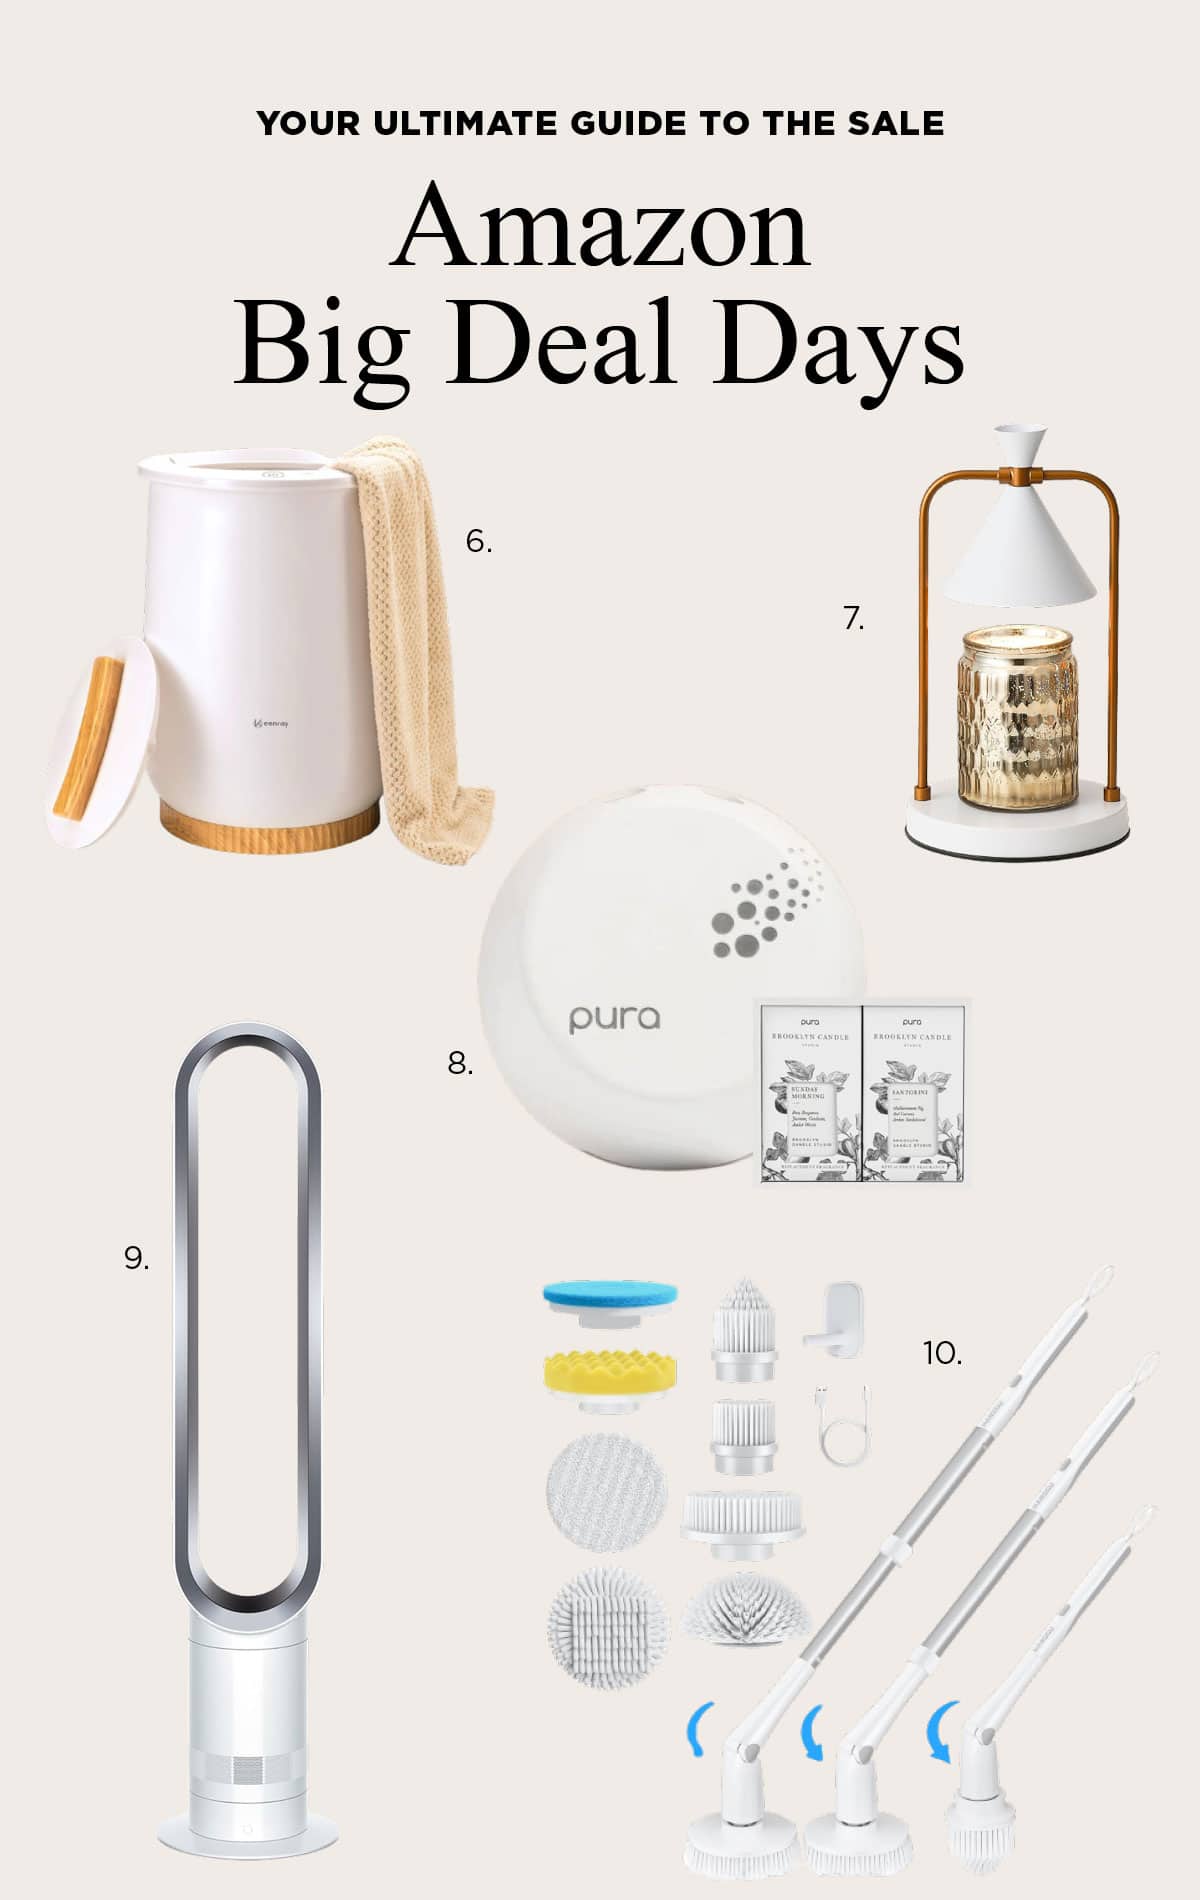 Prime Big Deal Days 2023: The Best Items to Shop